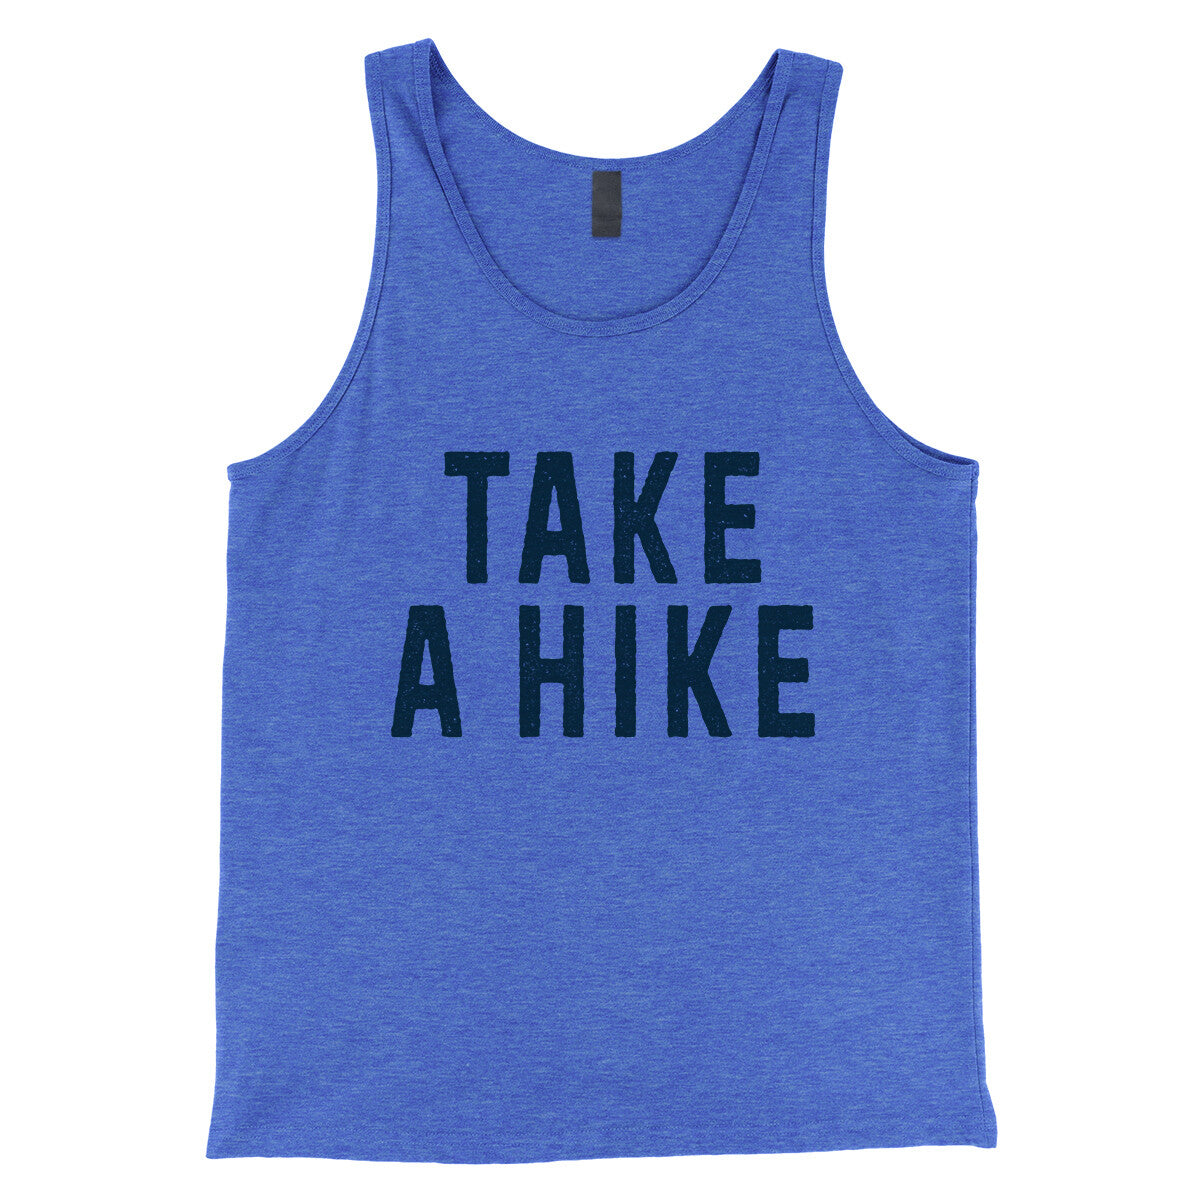 Take a Hike in True Royal TriBlend Color